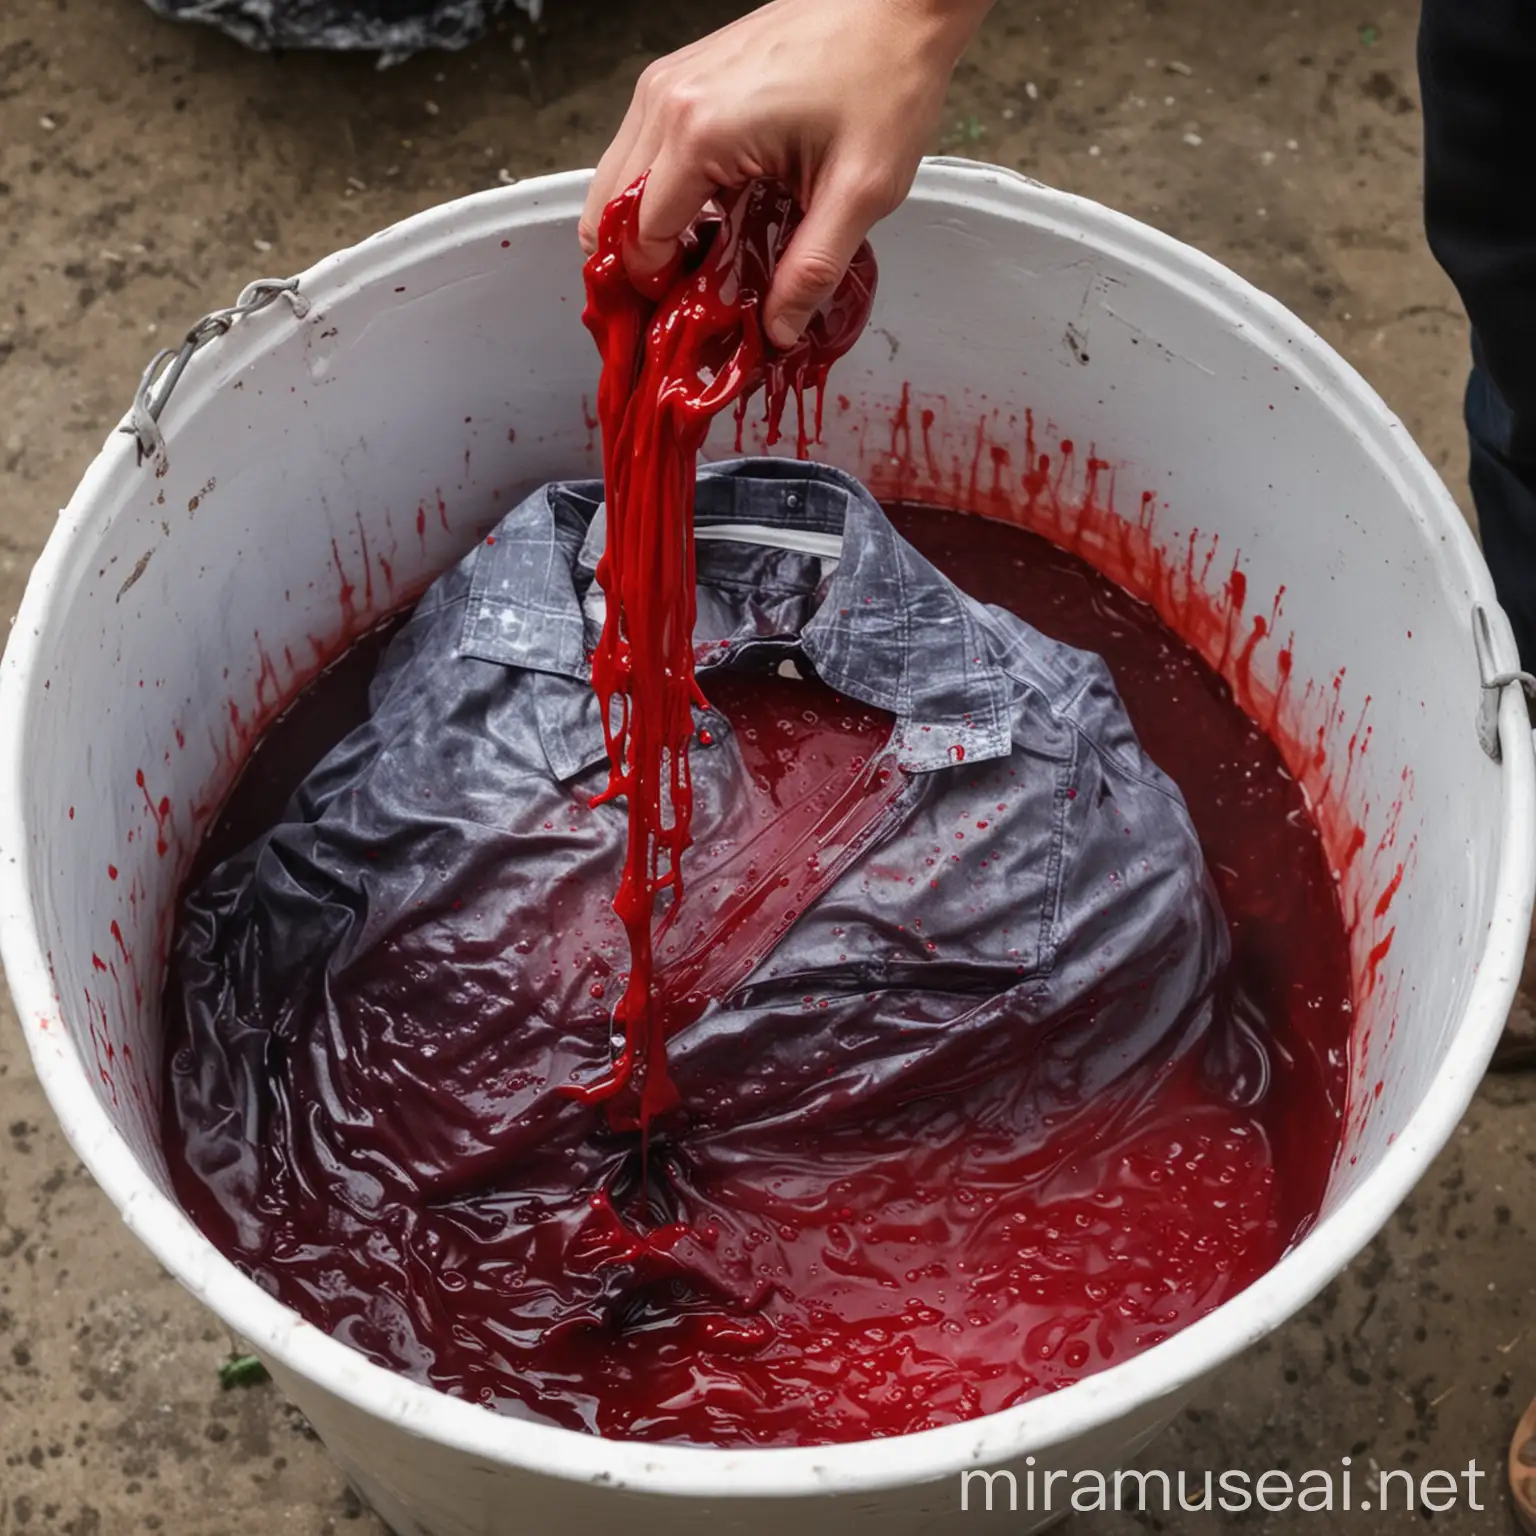 Shirt Dyeing Process Immersion in Vibrant Red Liquid